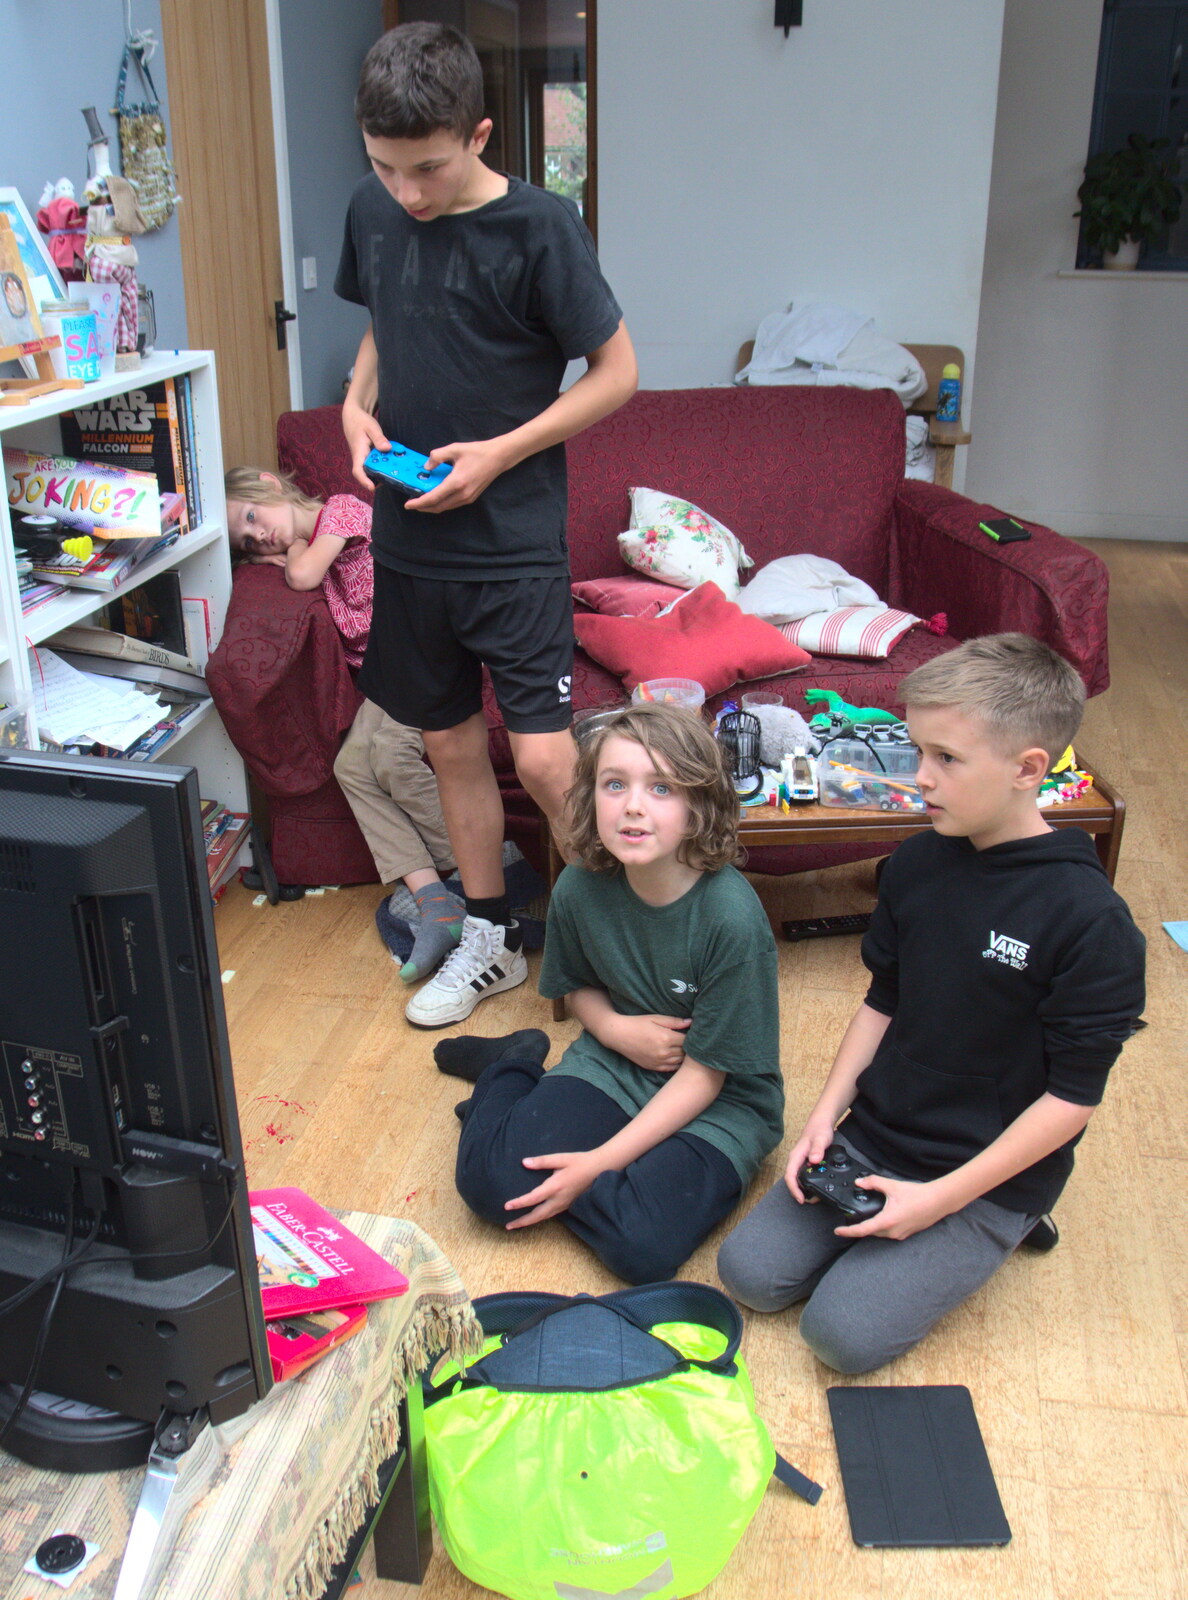 More action on the Xbox from The BSCC at Redgrave and Station 119, Eye, Suffolk - 17th July 2020